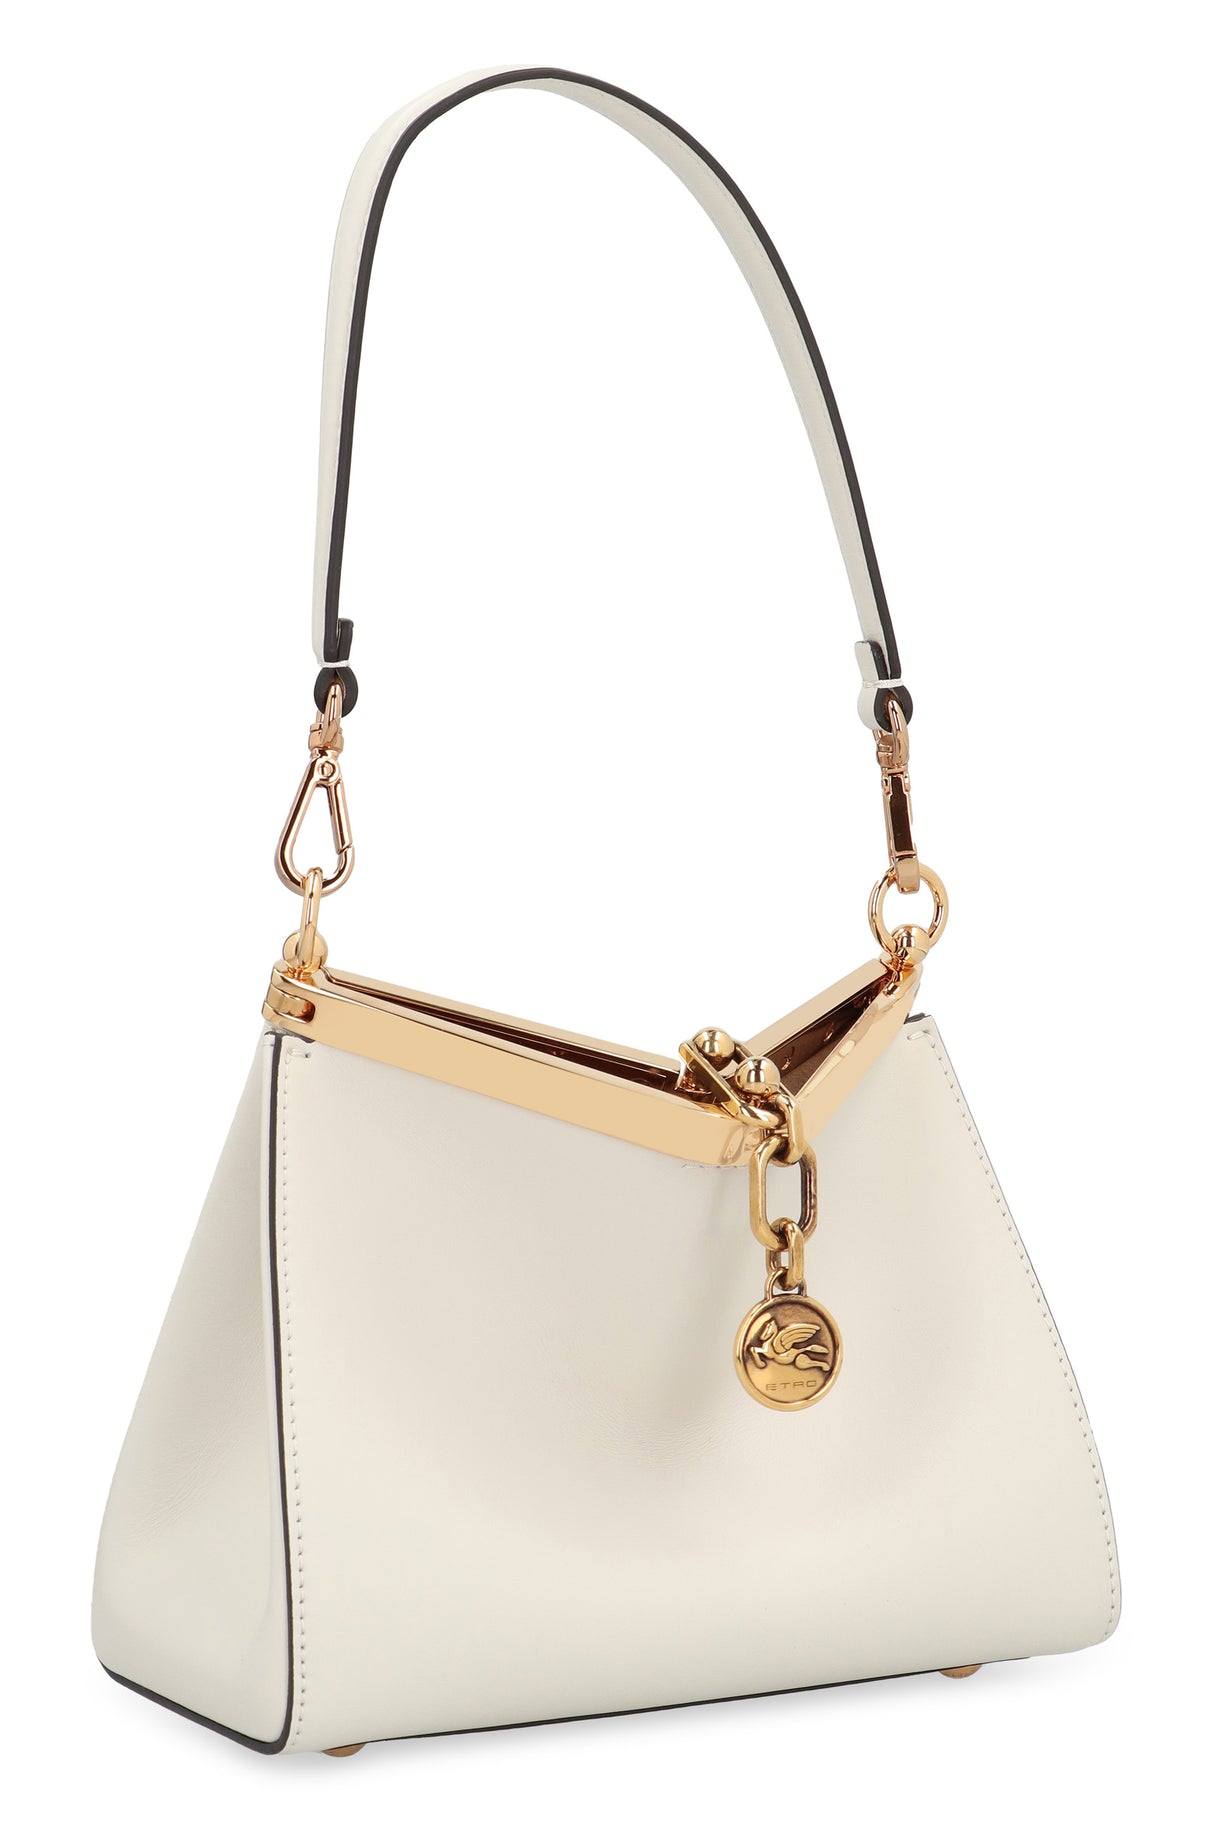 ETRO Chic Beige Mini Leather Shoulder Bag with Gold-Tone Accents - 21x16x9 cm